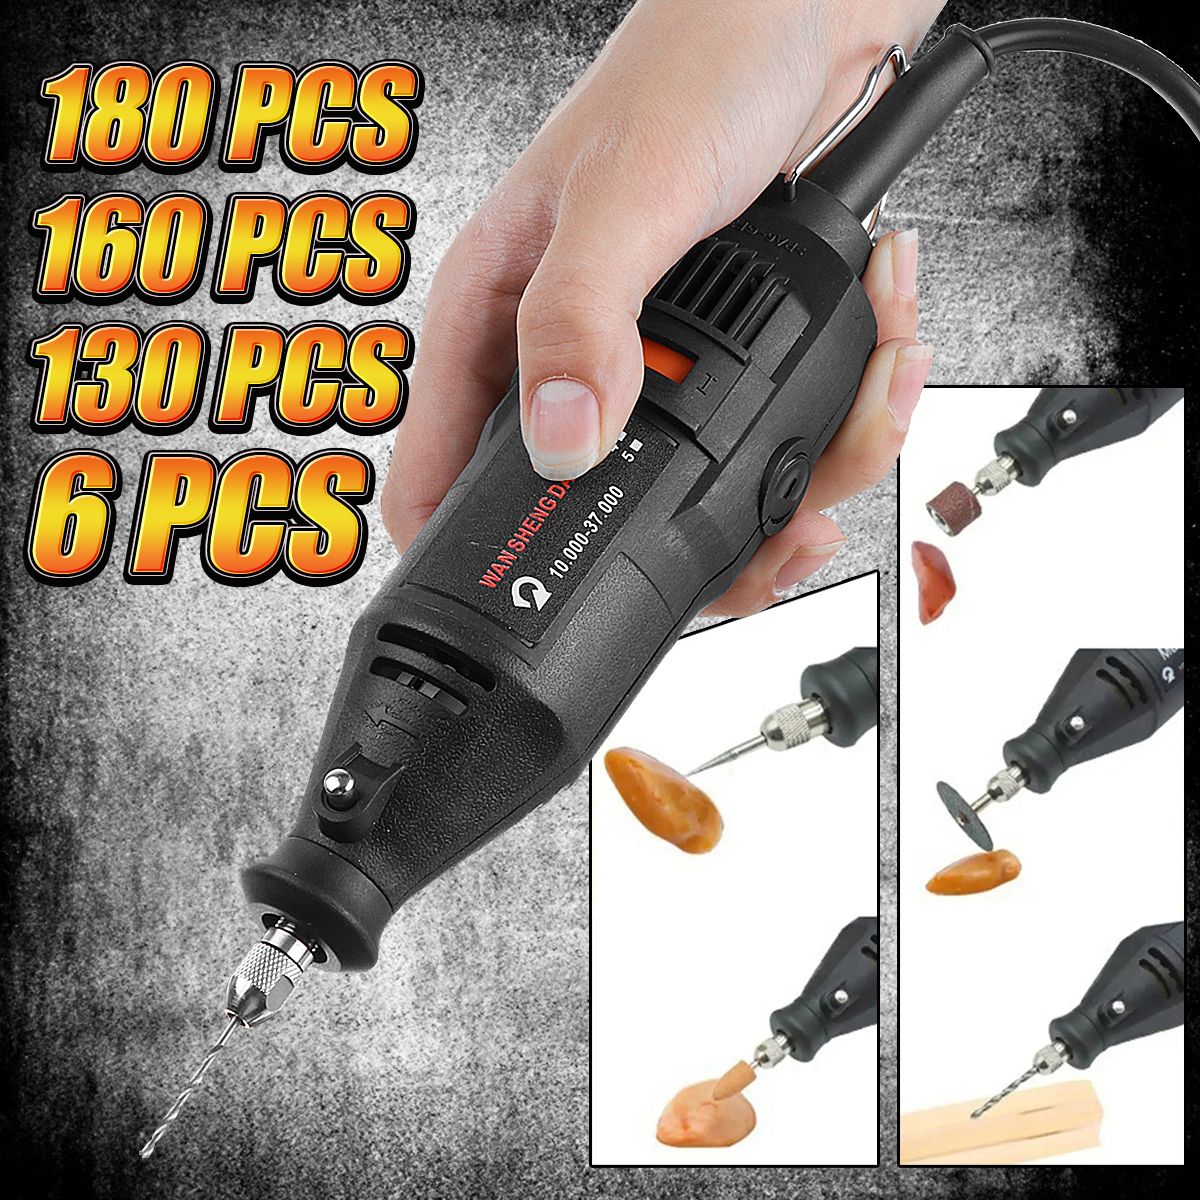 180W-Electric-Rotary-Grinder-Polish-Sanding-Pen-Tool-Kit-Grind-Variable-5-Speed-1711207